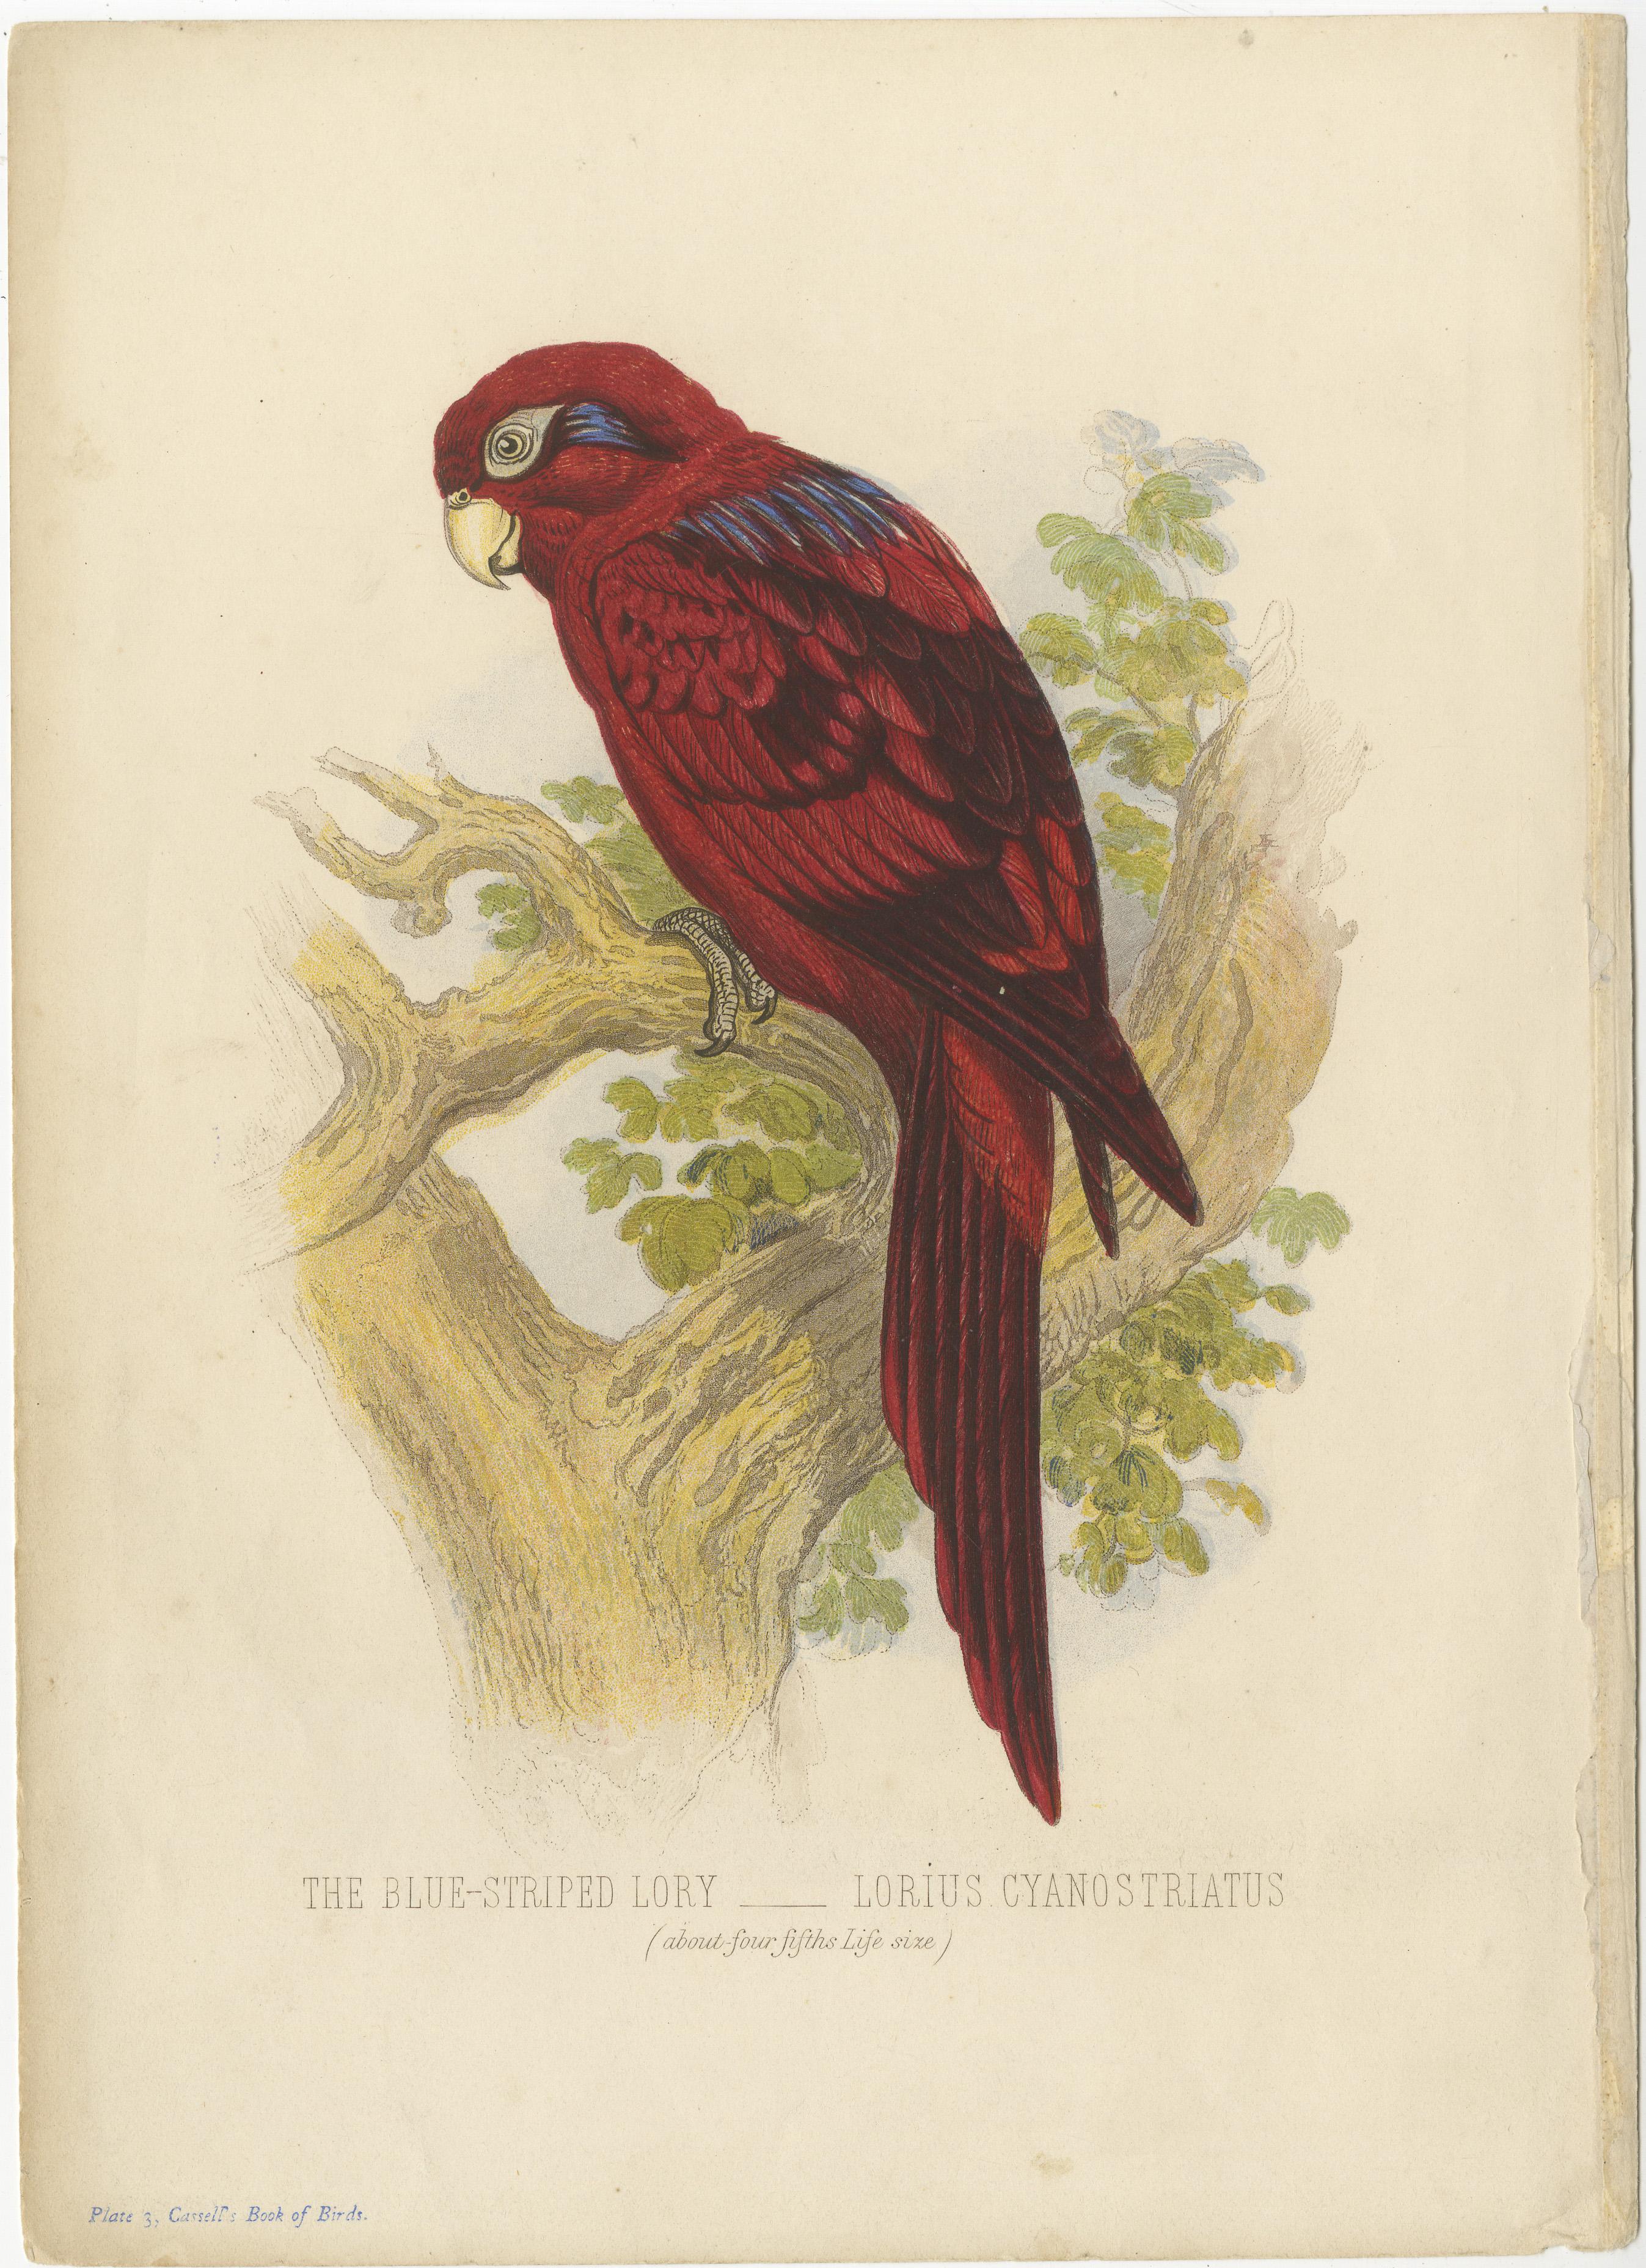 Antique print titled 'the blue-striped lory (Lorius cyanostriatus)'. Beautiful print of a blue-streaked lory, also known as the blue-necked lory. It is a medium-sized parrot. Original illustration for Cassells Book of Birds by Thomas Rymer Jones